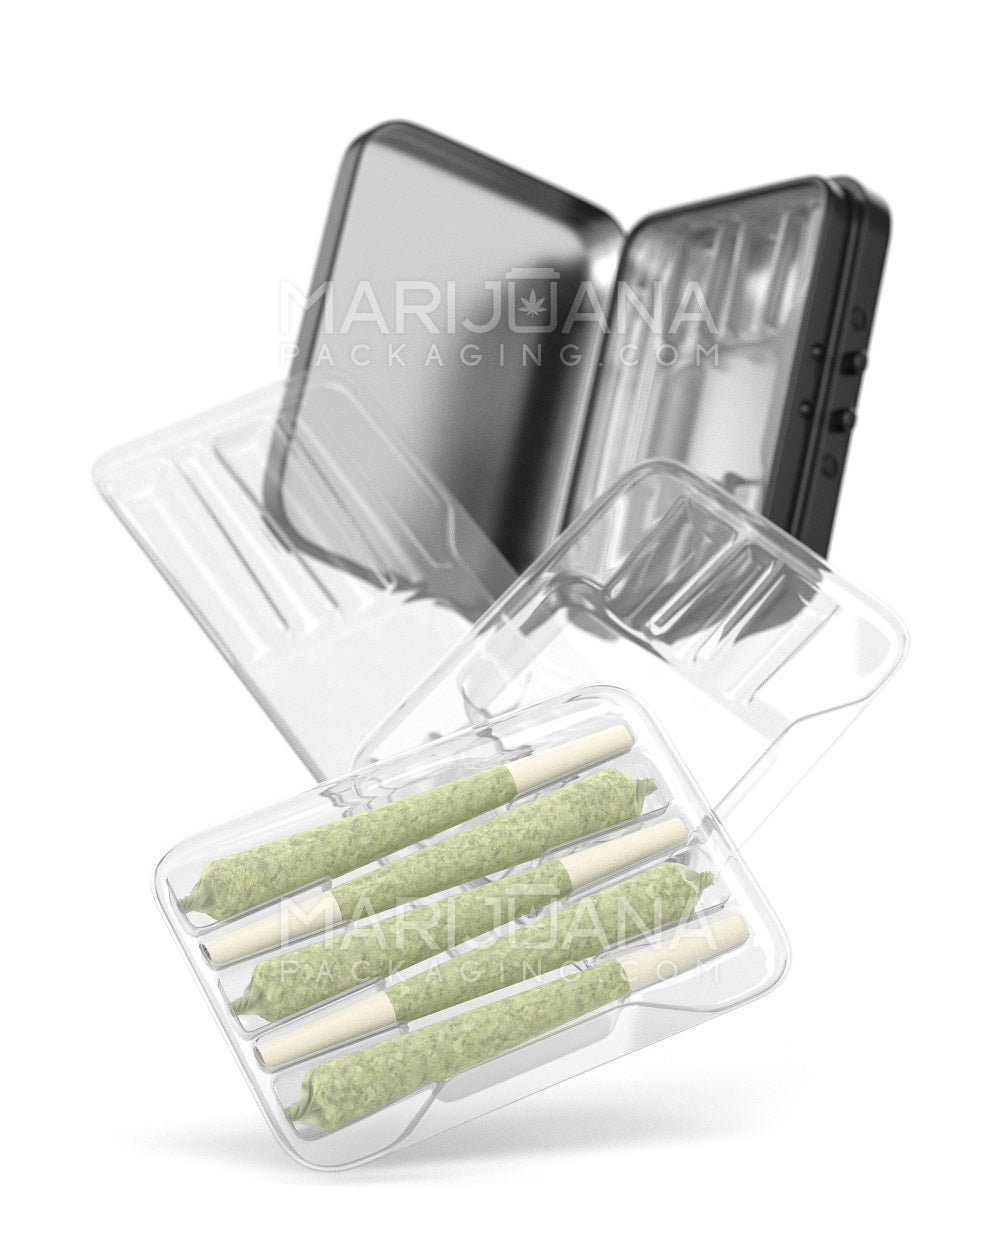 Edible & Joint Box Insert Tray for 5 Mini Pre Rolled Cones | 70mm - Clear Plastic - 100 Count - 9